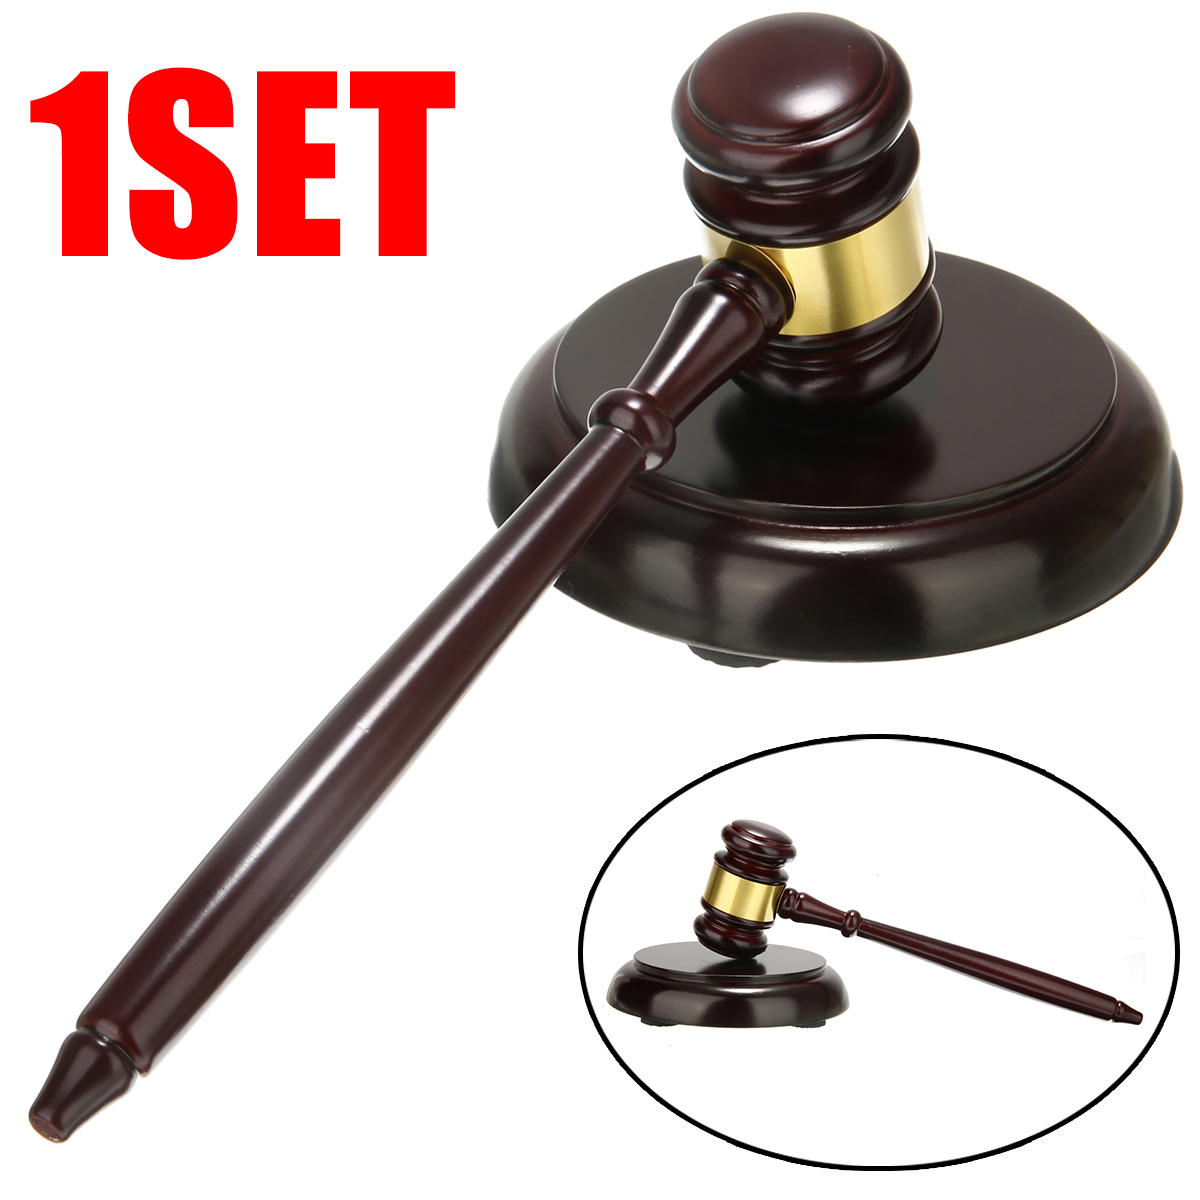 Judging Gavel Wooden Handcrafted Auction Hammer Wood Gavel with Sound Block for Lawyer Judge Auctioneer Sale Decor Crafts Gift